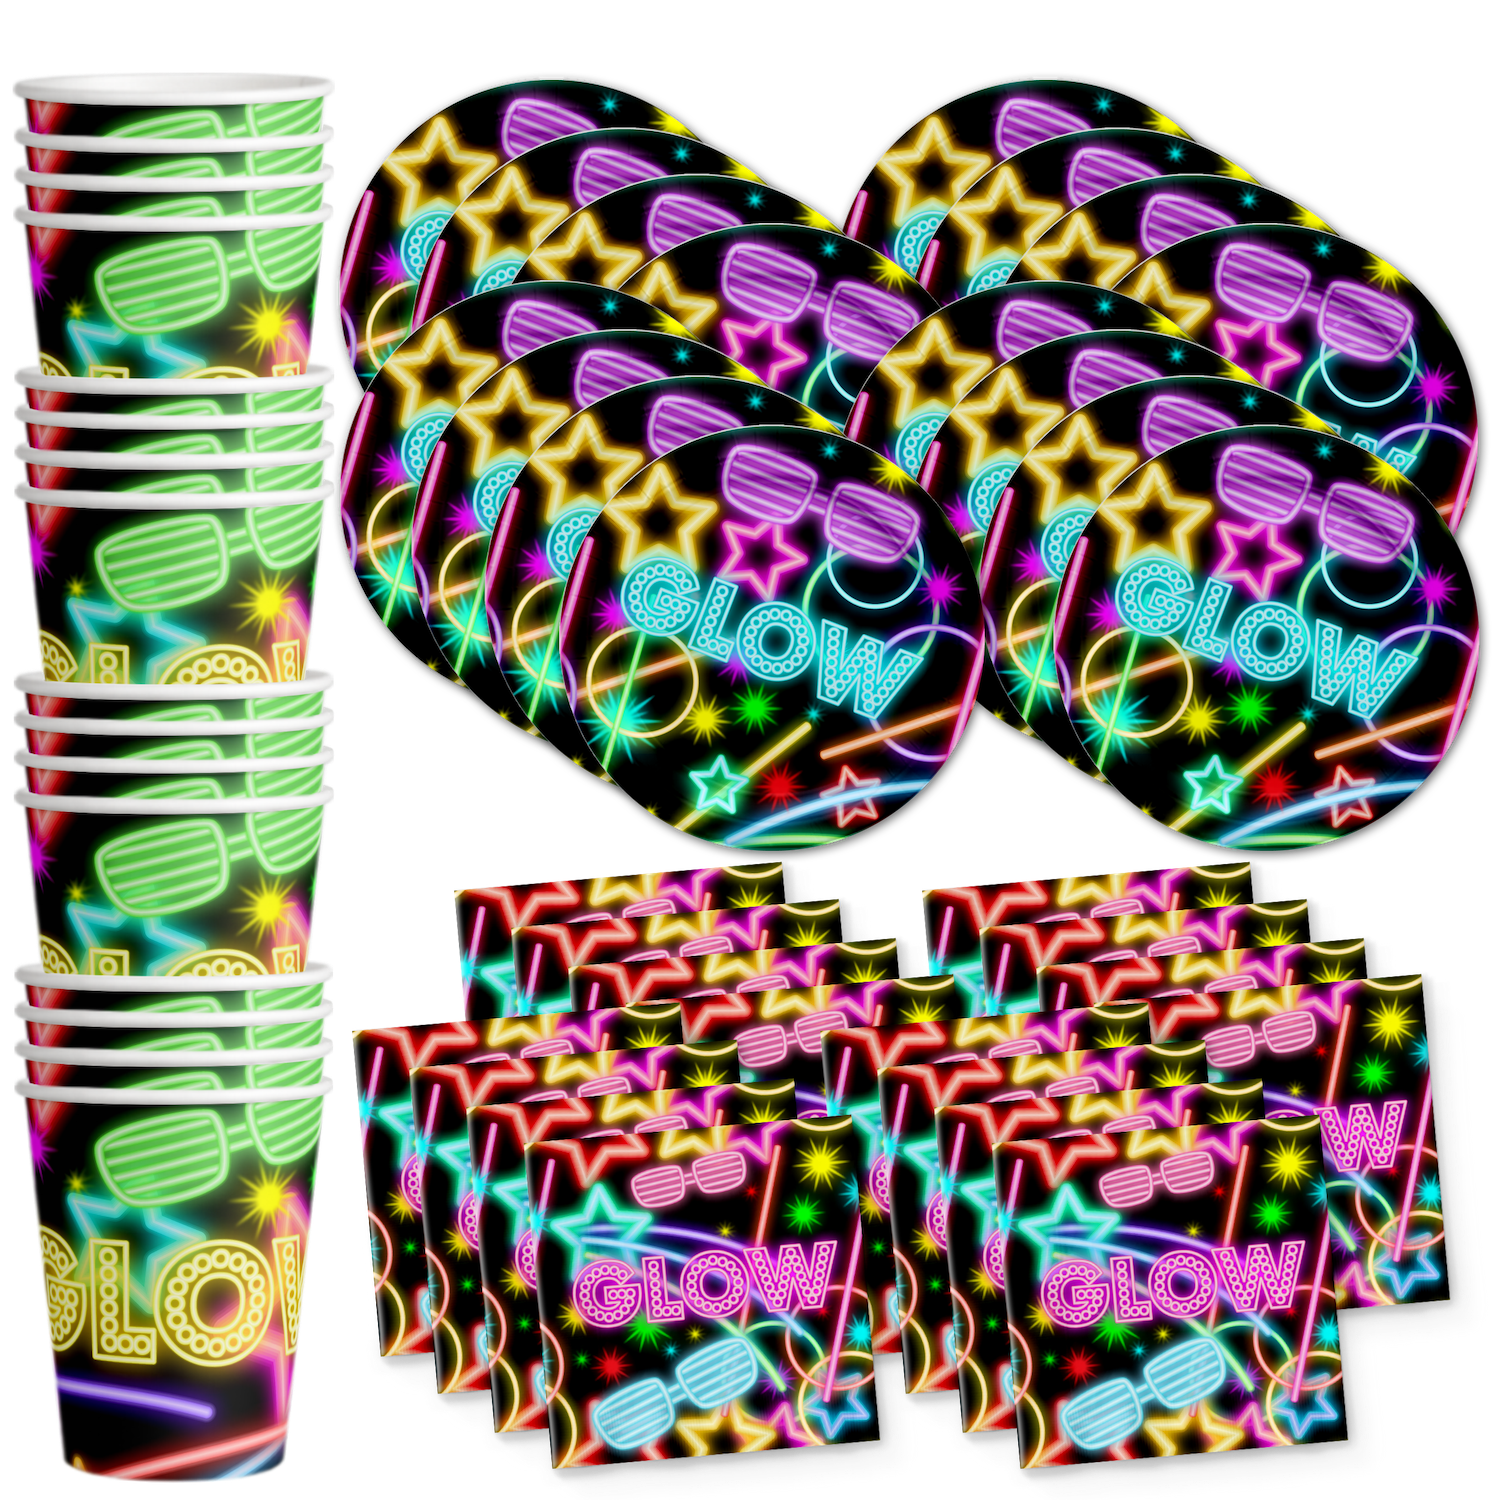 Glow Party Supplies Neon Birthday Party Kit Paper Plates Napkins Cups  Plastic Table cover glow Sticks Glow Bracelets for 16 Guests 